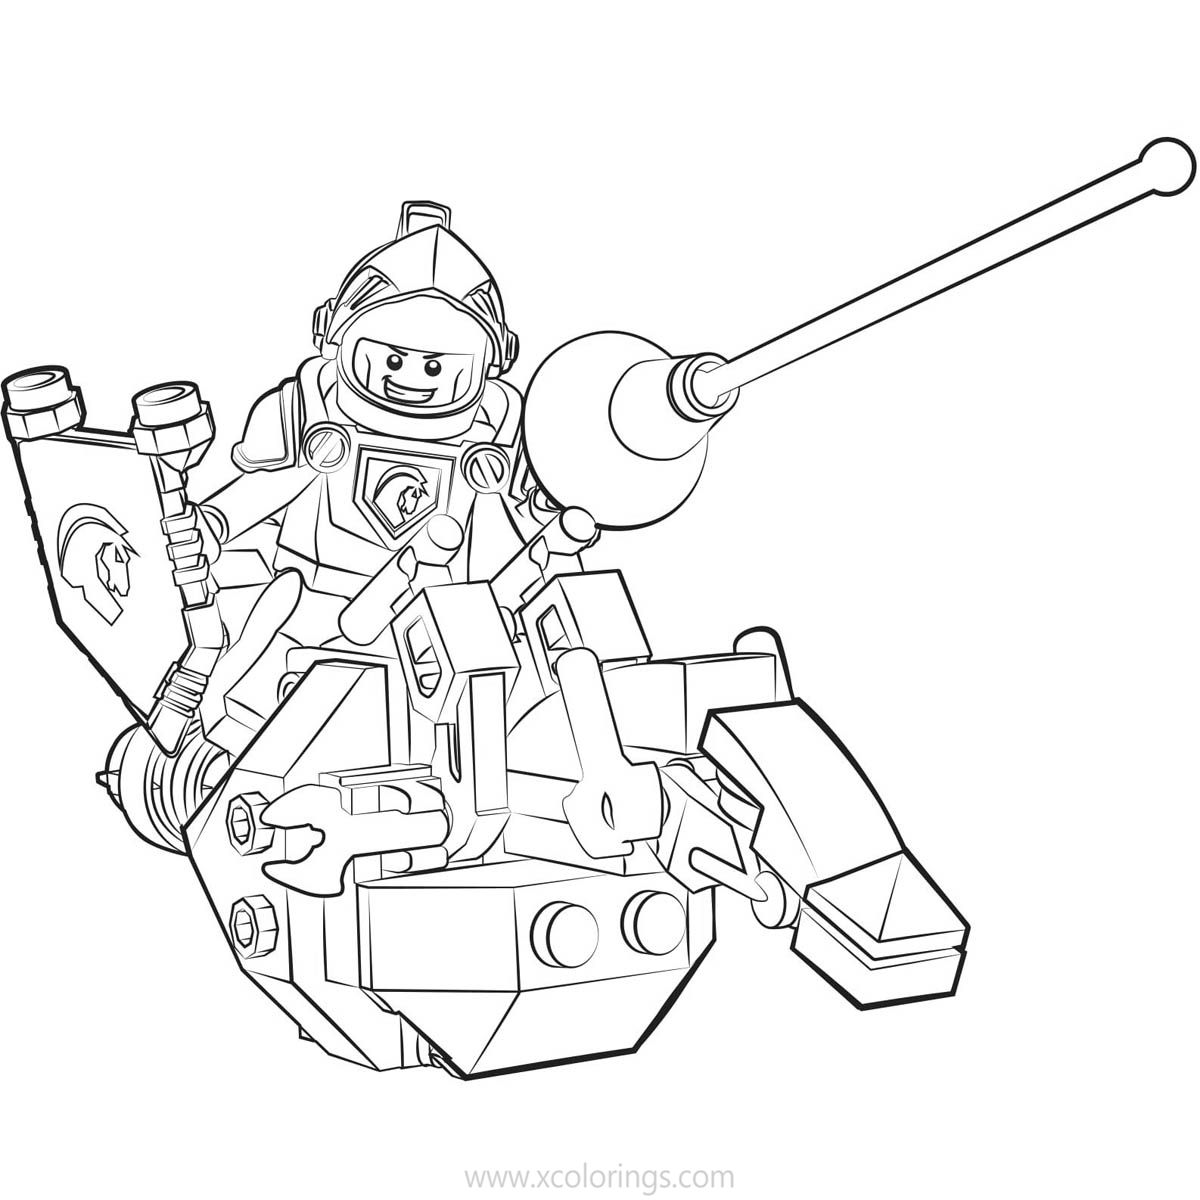 LEGO NEXO Knights Coloring Pages Lance Printable - XColorings.com